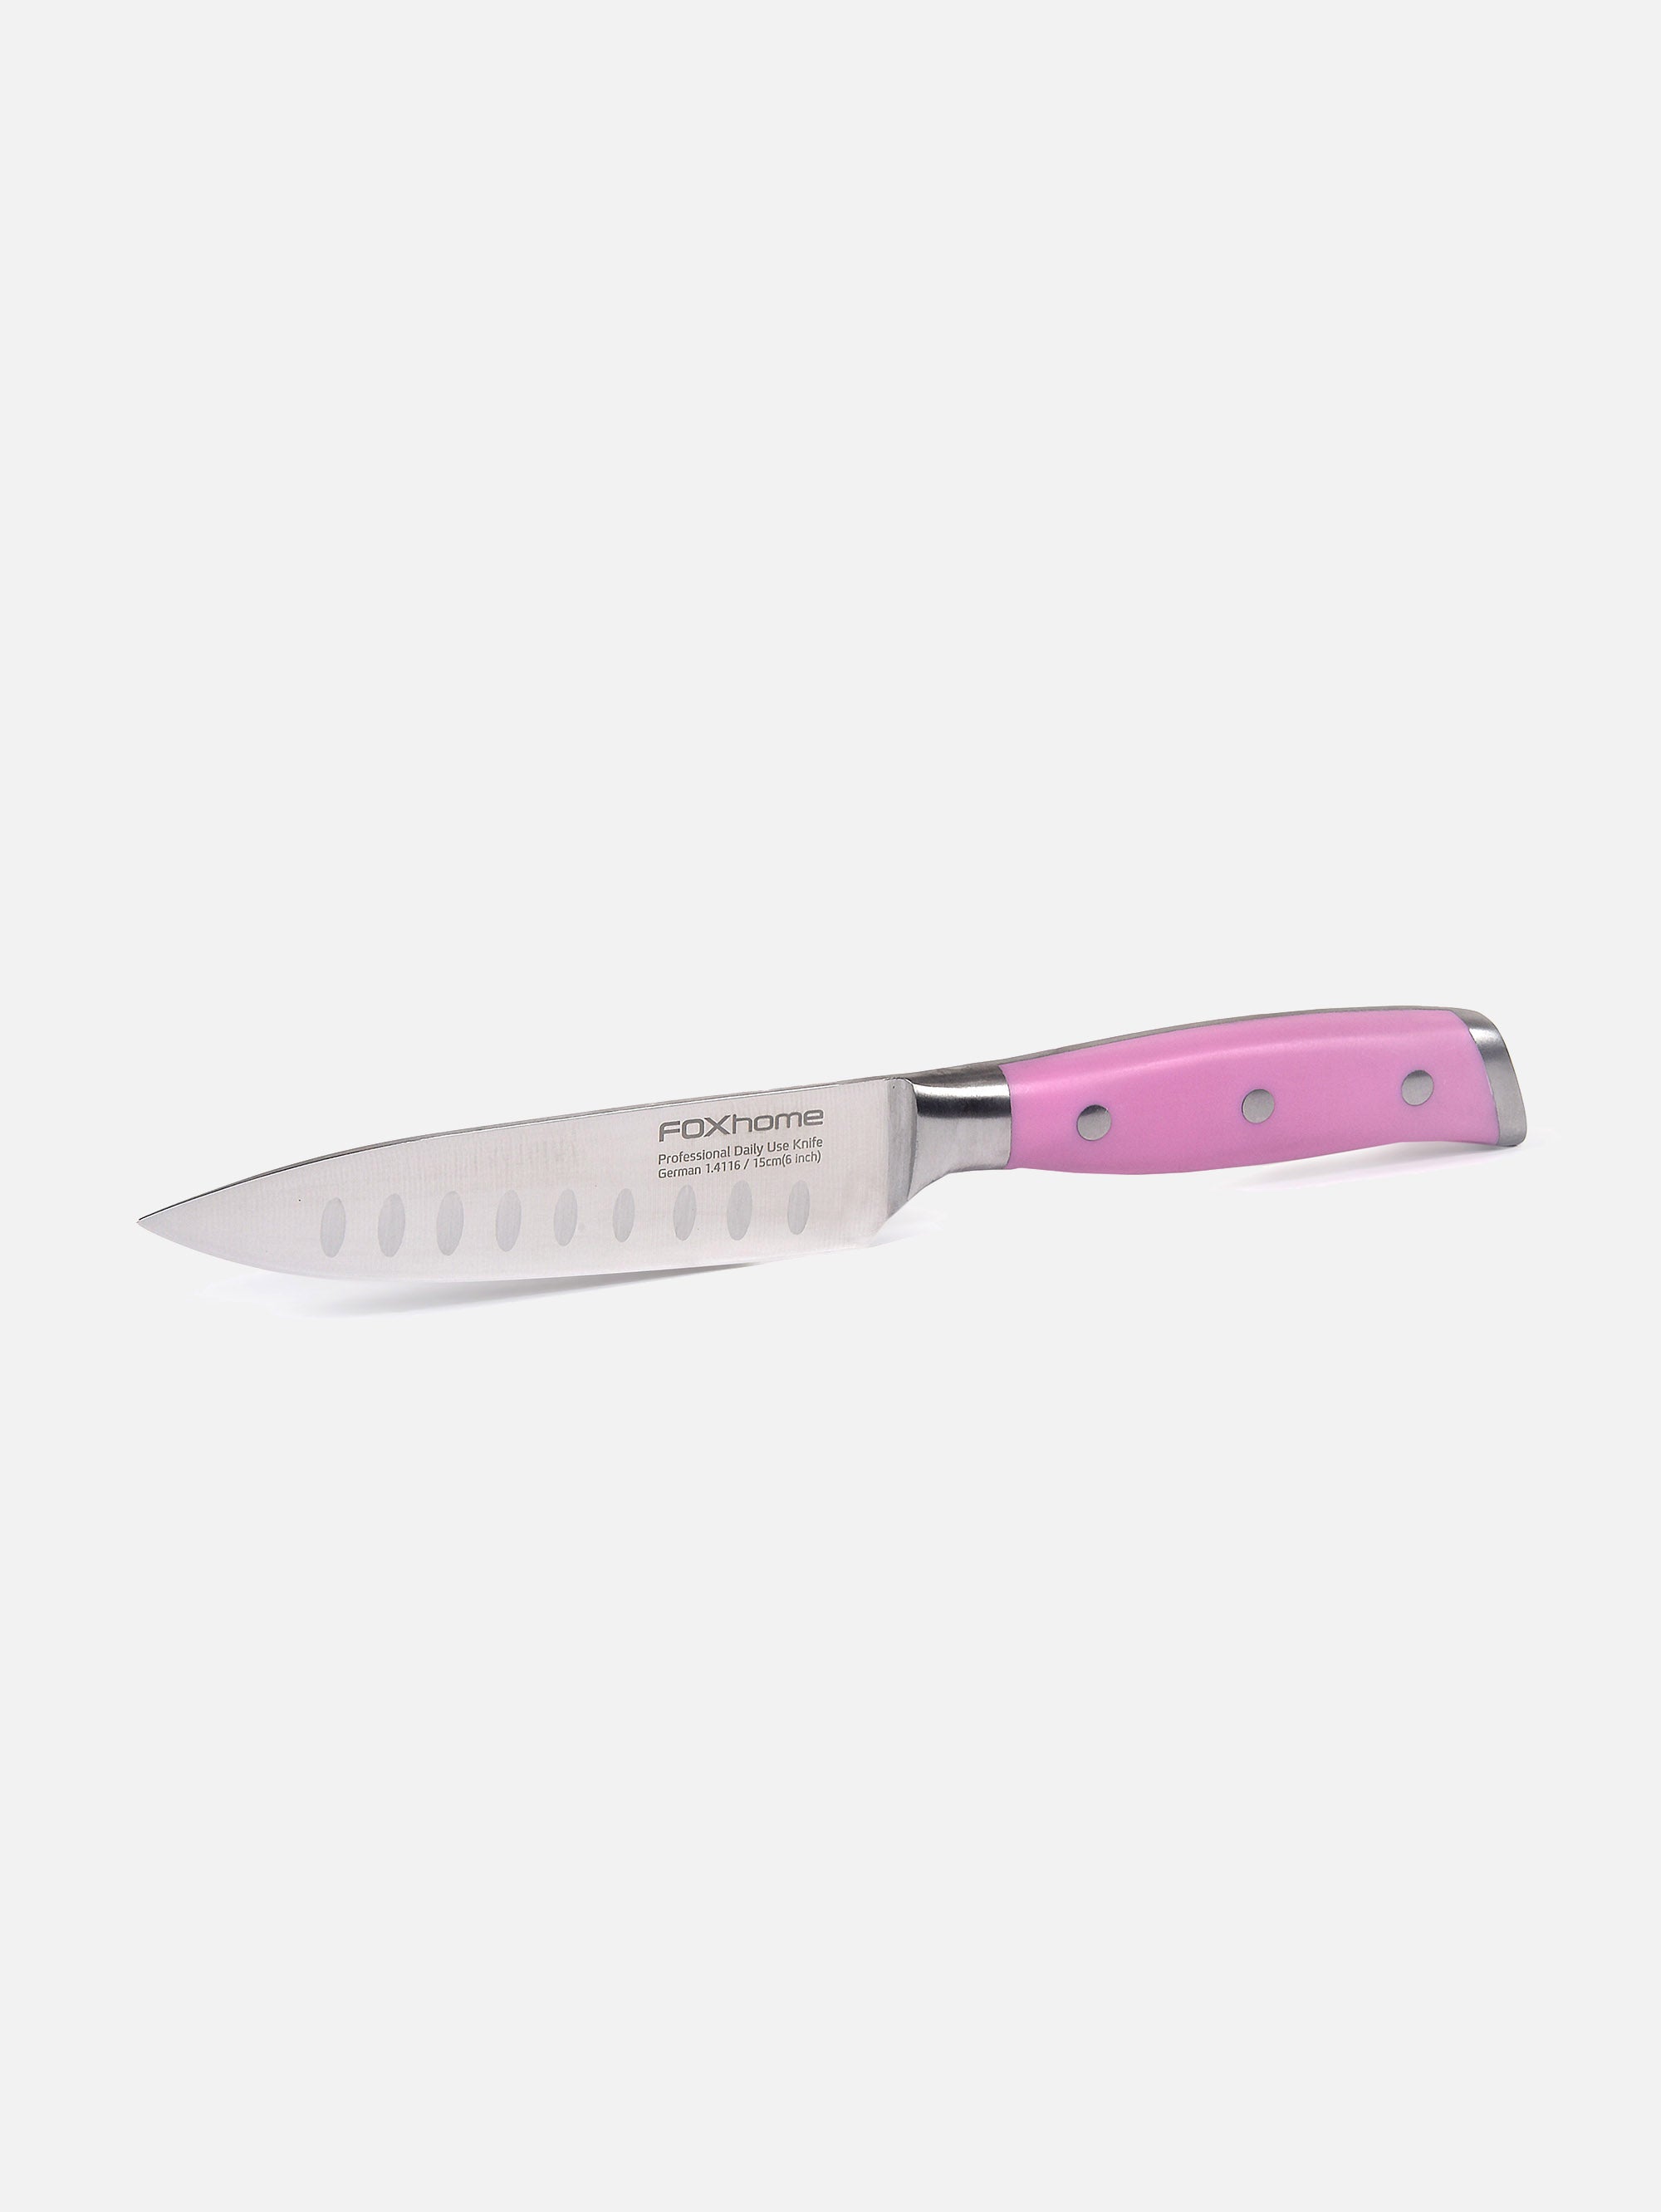 PROFESSIONAL Chefs Knife 6